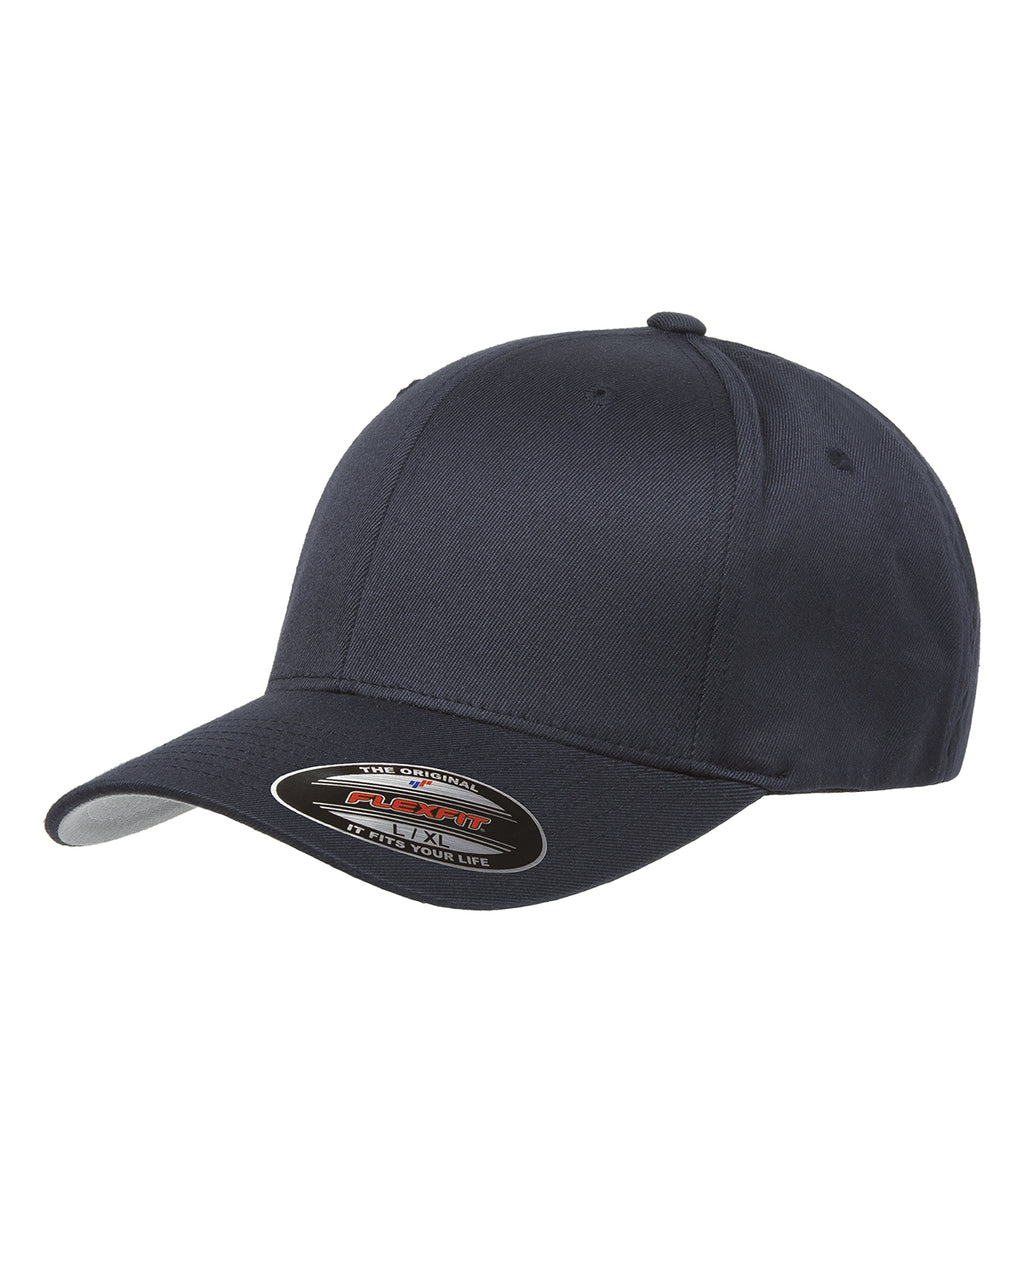 EMS Star of Life Flexfit Hat - Firefighter Clothing & Accessories